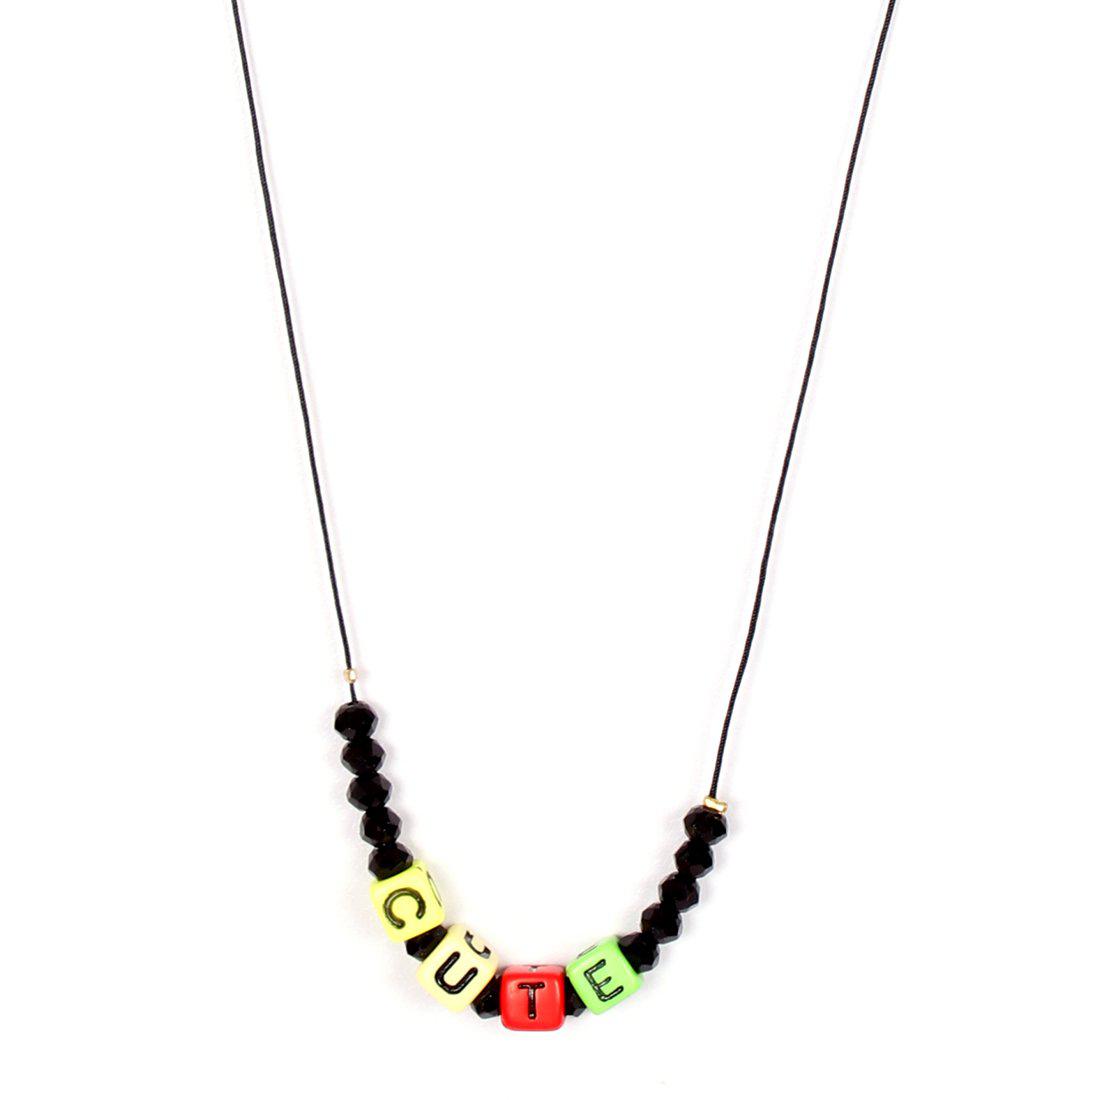 CUTE LETTERED CHAIN PENDANT NECKLACE